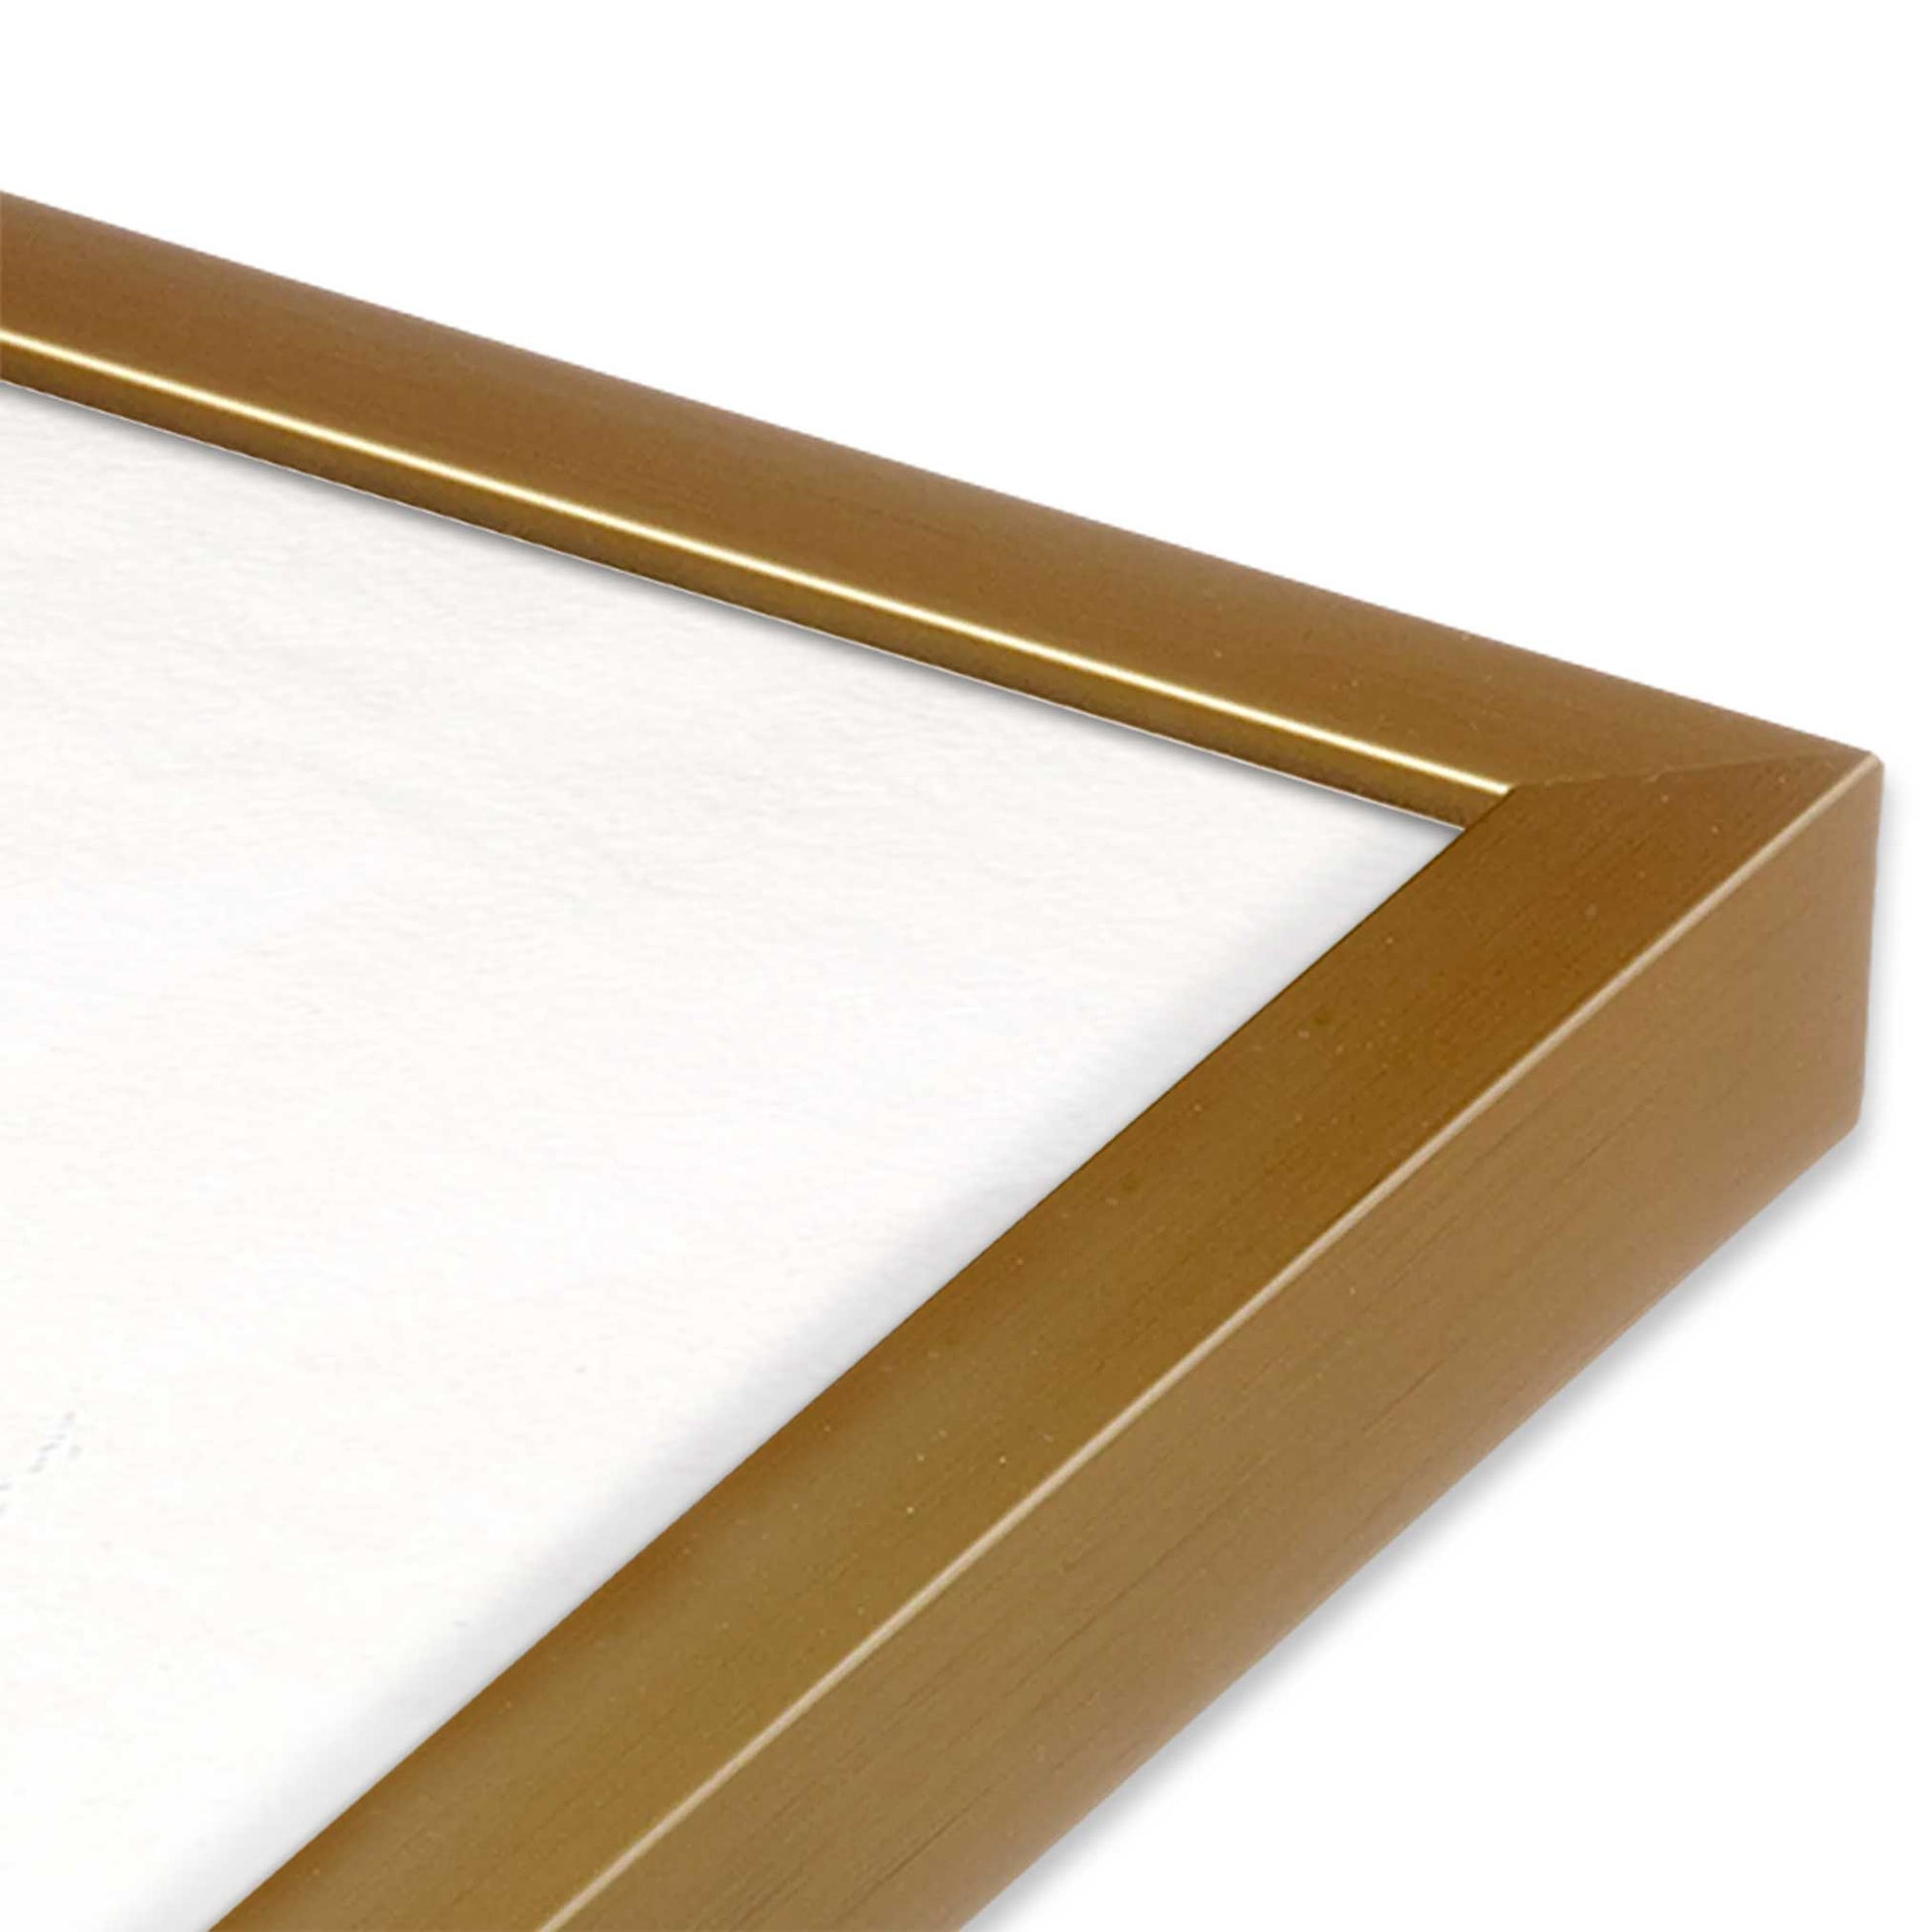 [Color:Polished Gold], Picture of art in a Polished Gold frame of the corner #2